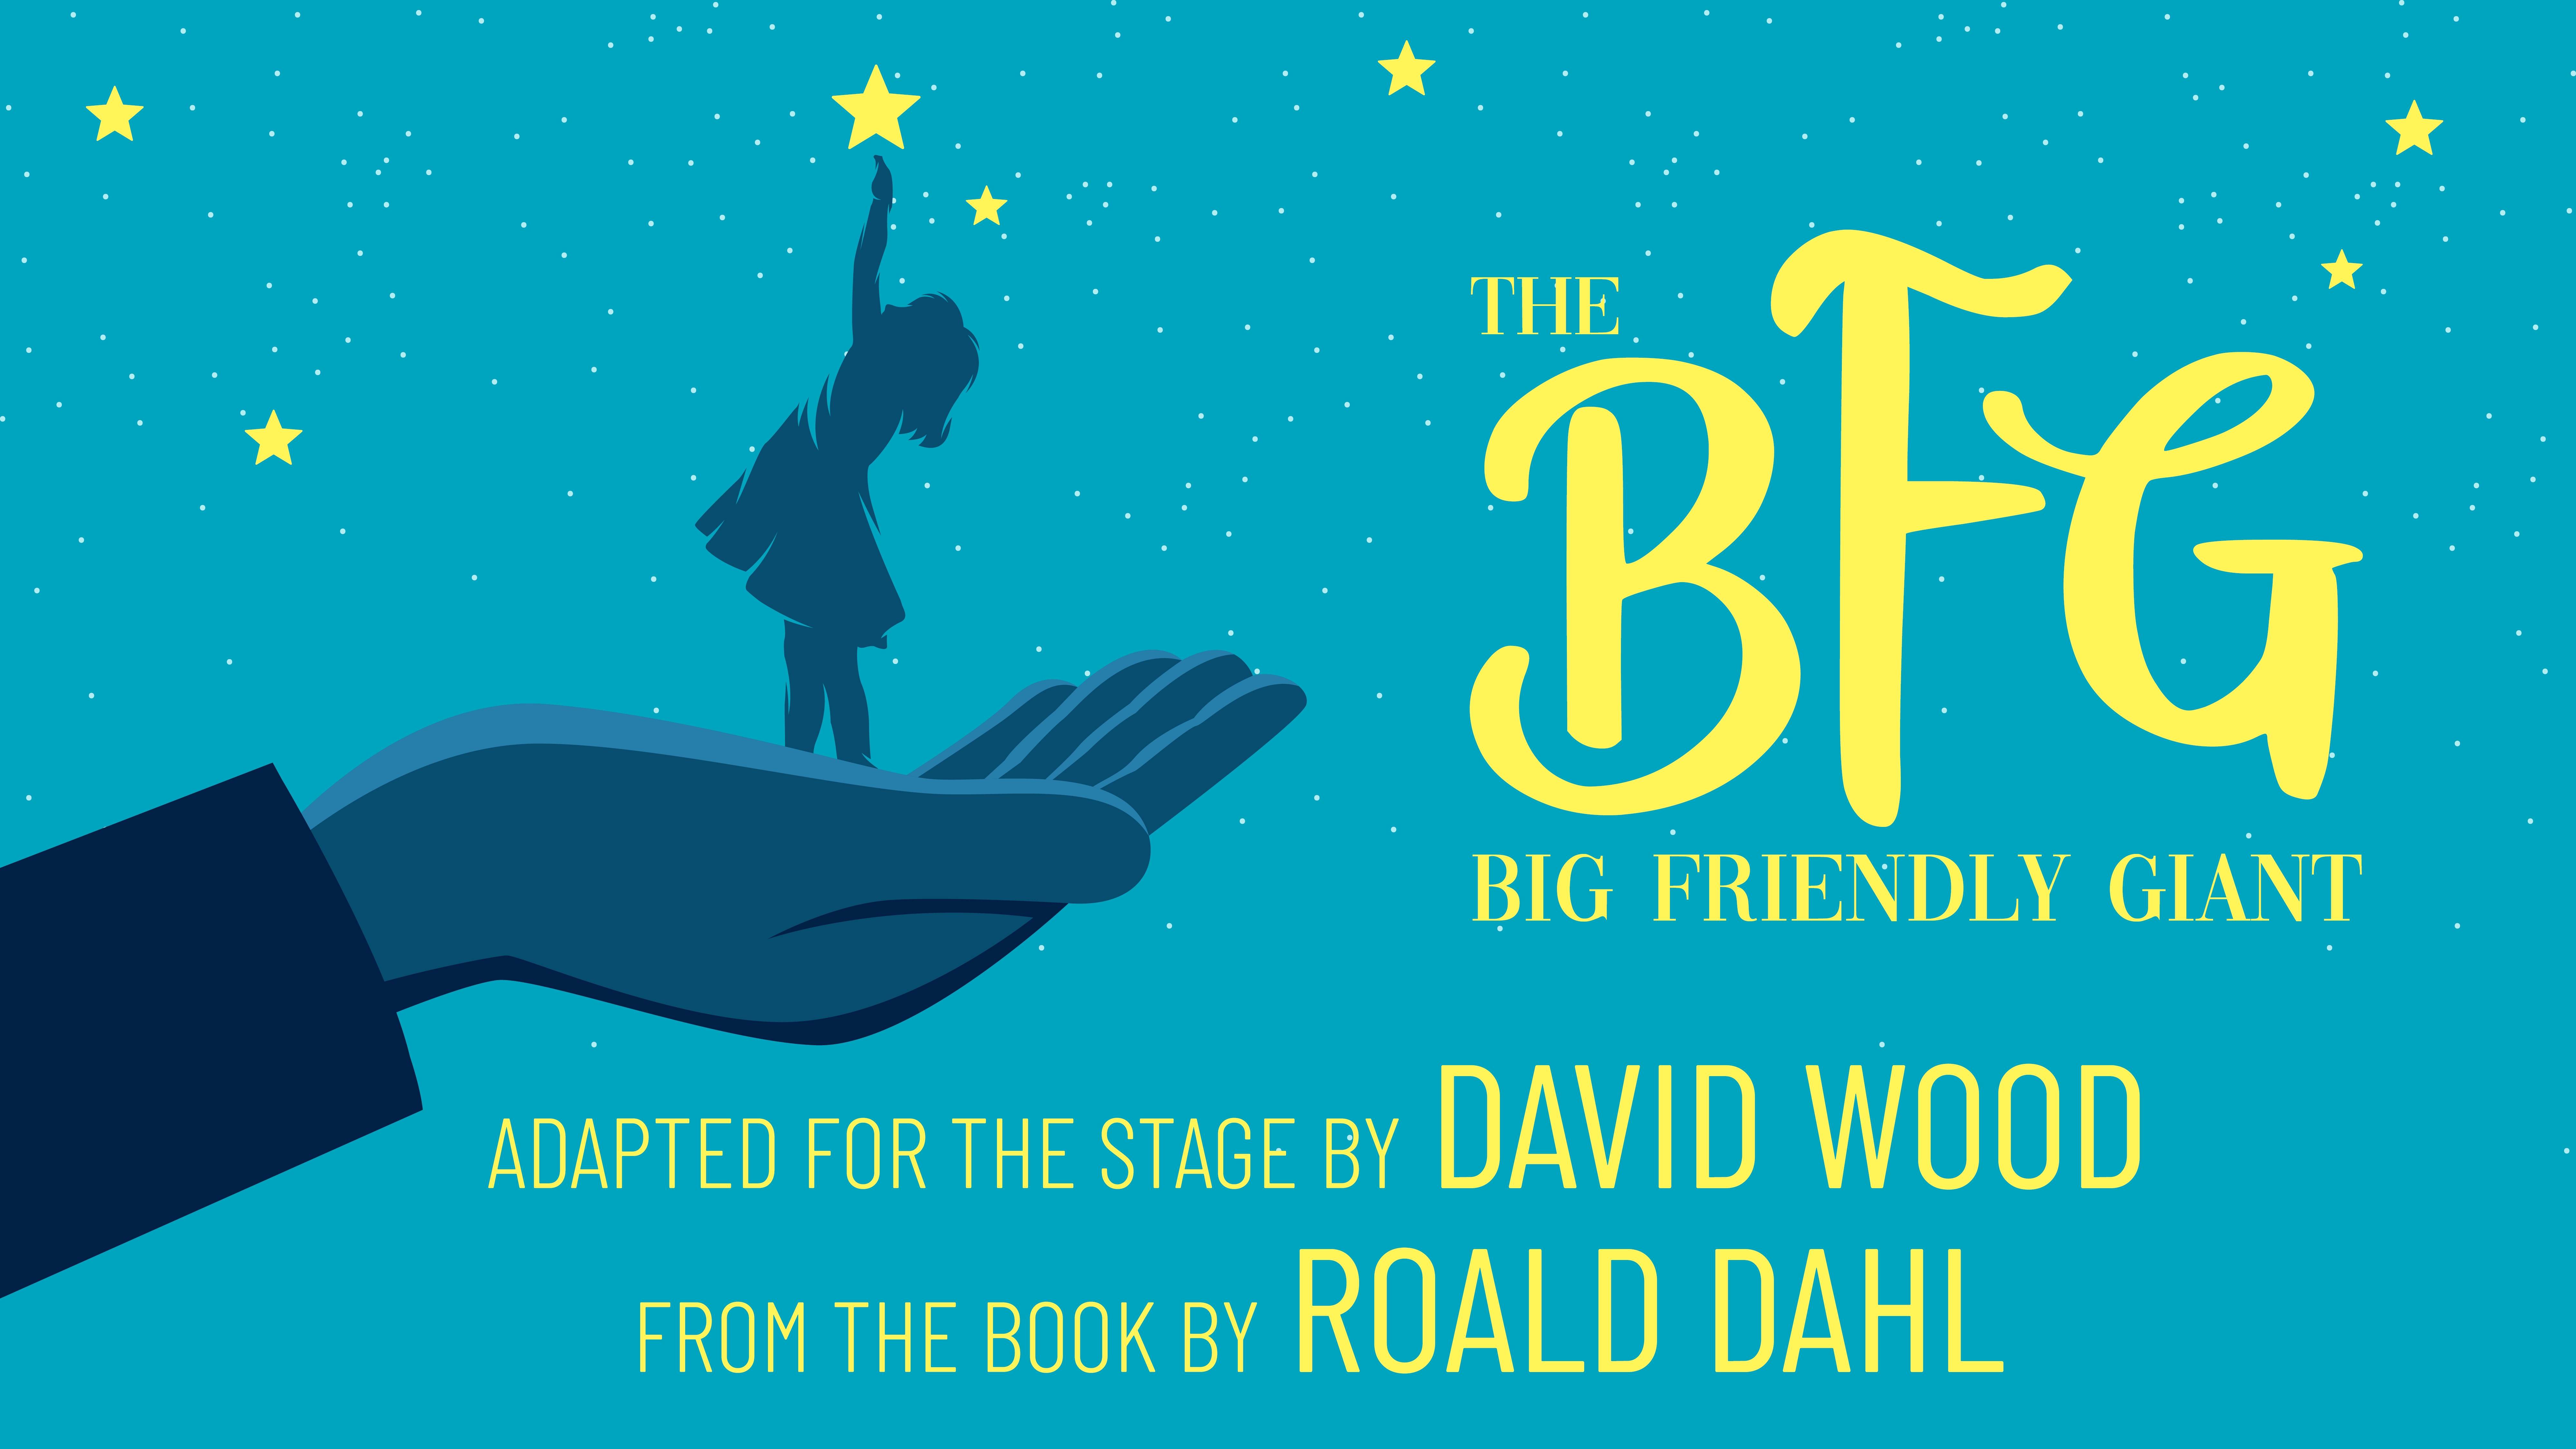 The BFG Big Friendly Giant adapted by David Wood